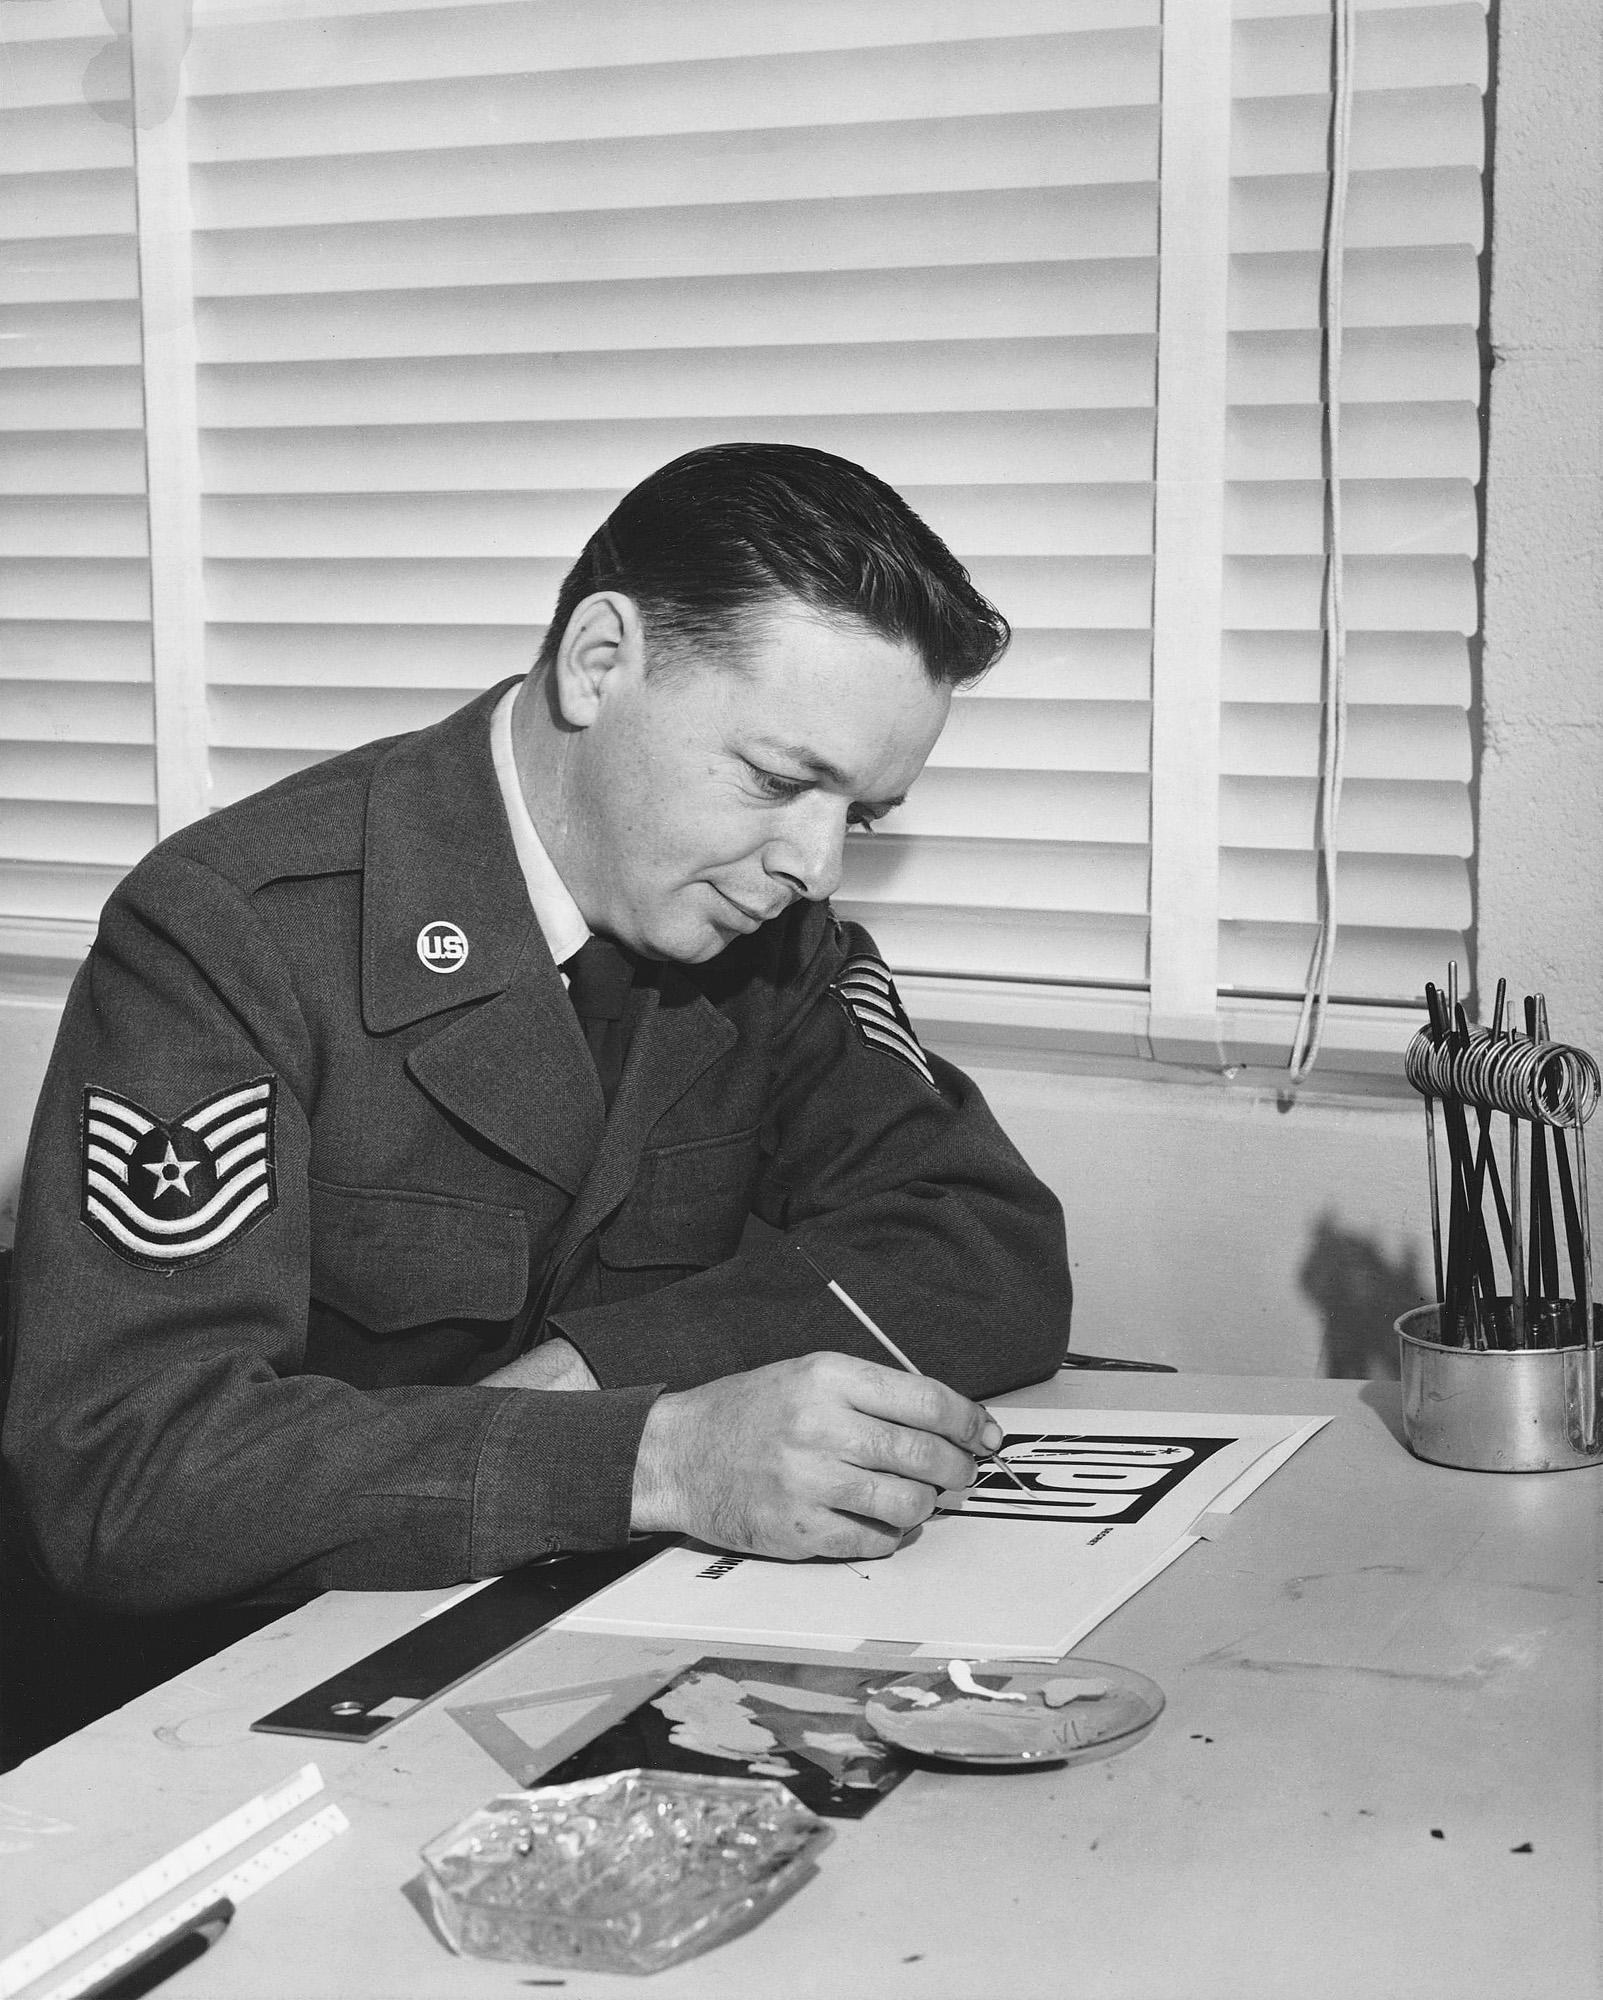 Another photo of my Father, Gordon Clevenger, working at his desk at Edwards AFB, circa 1962. He designed a lot of things for the Air Force, including some he couldn't tell us about, but he also designed various brochures, ads, and booklets for the military, including a few of his Commanding Officer's annual Christmas Cards. View full size.